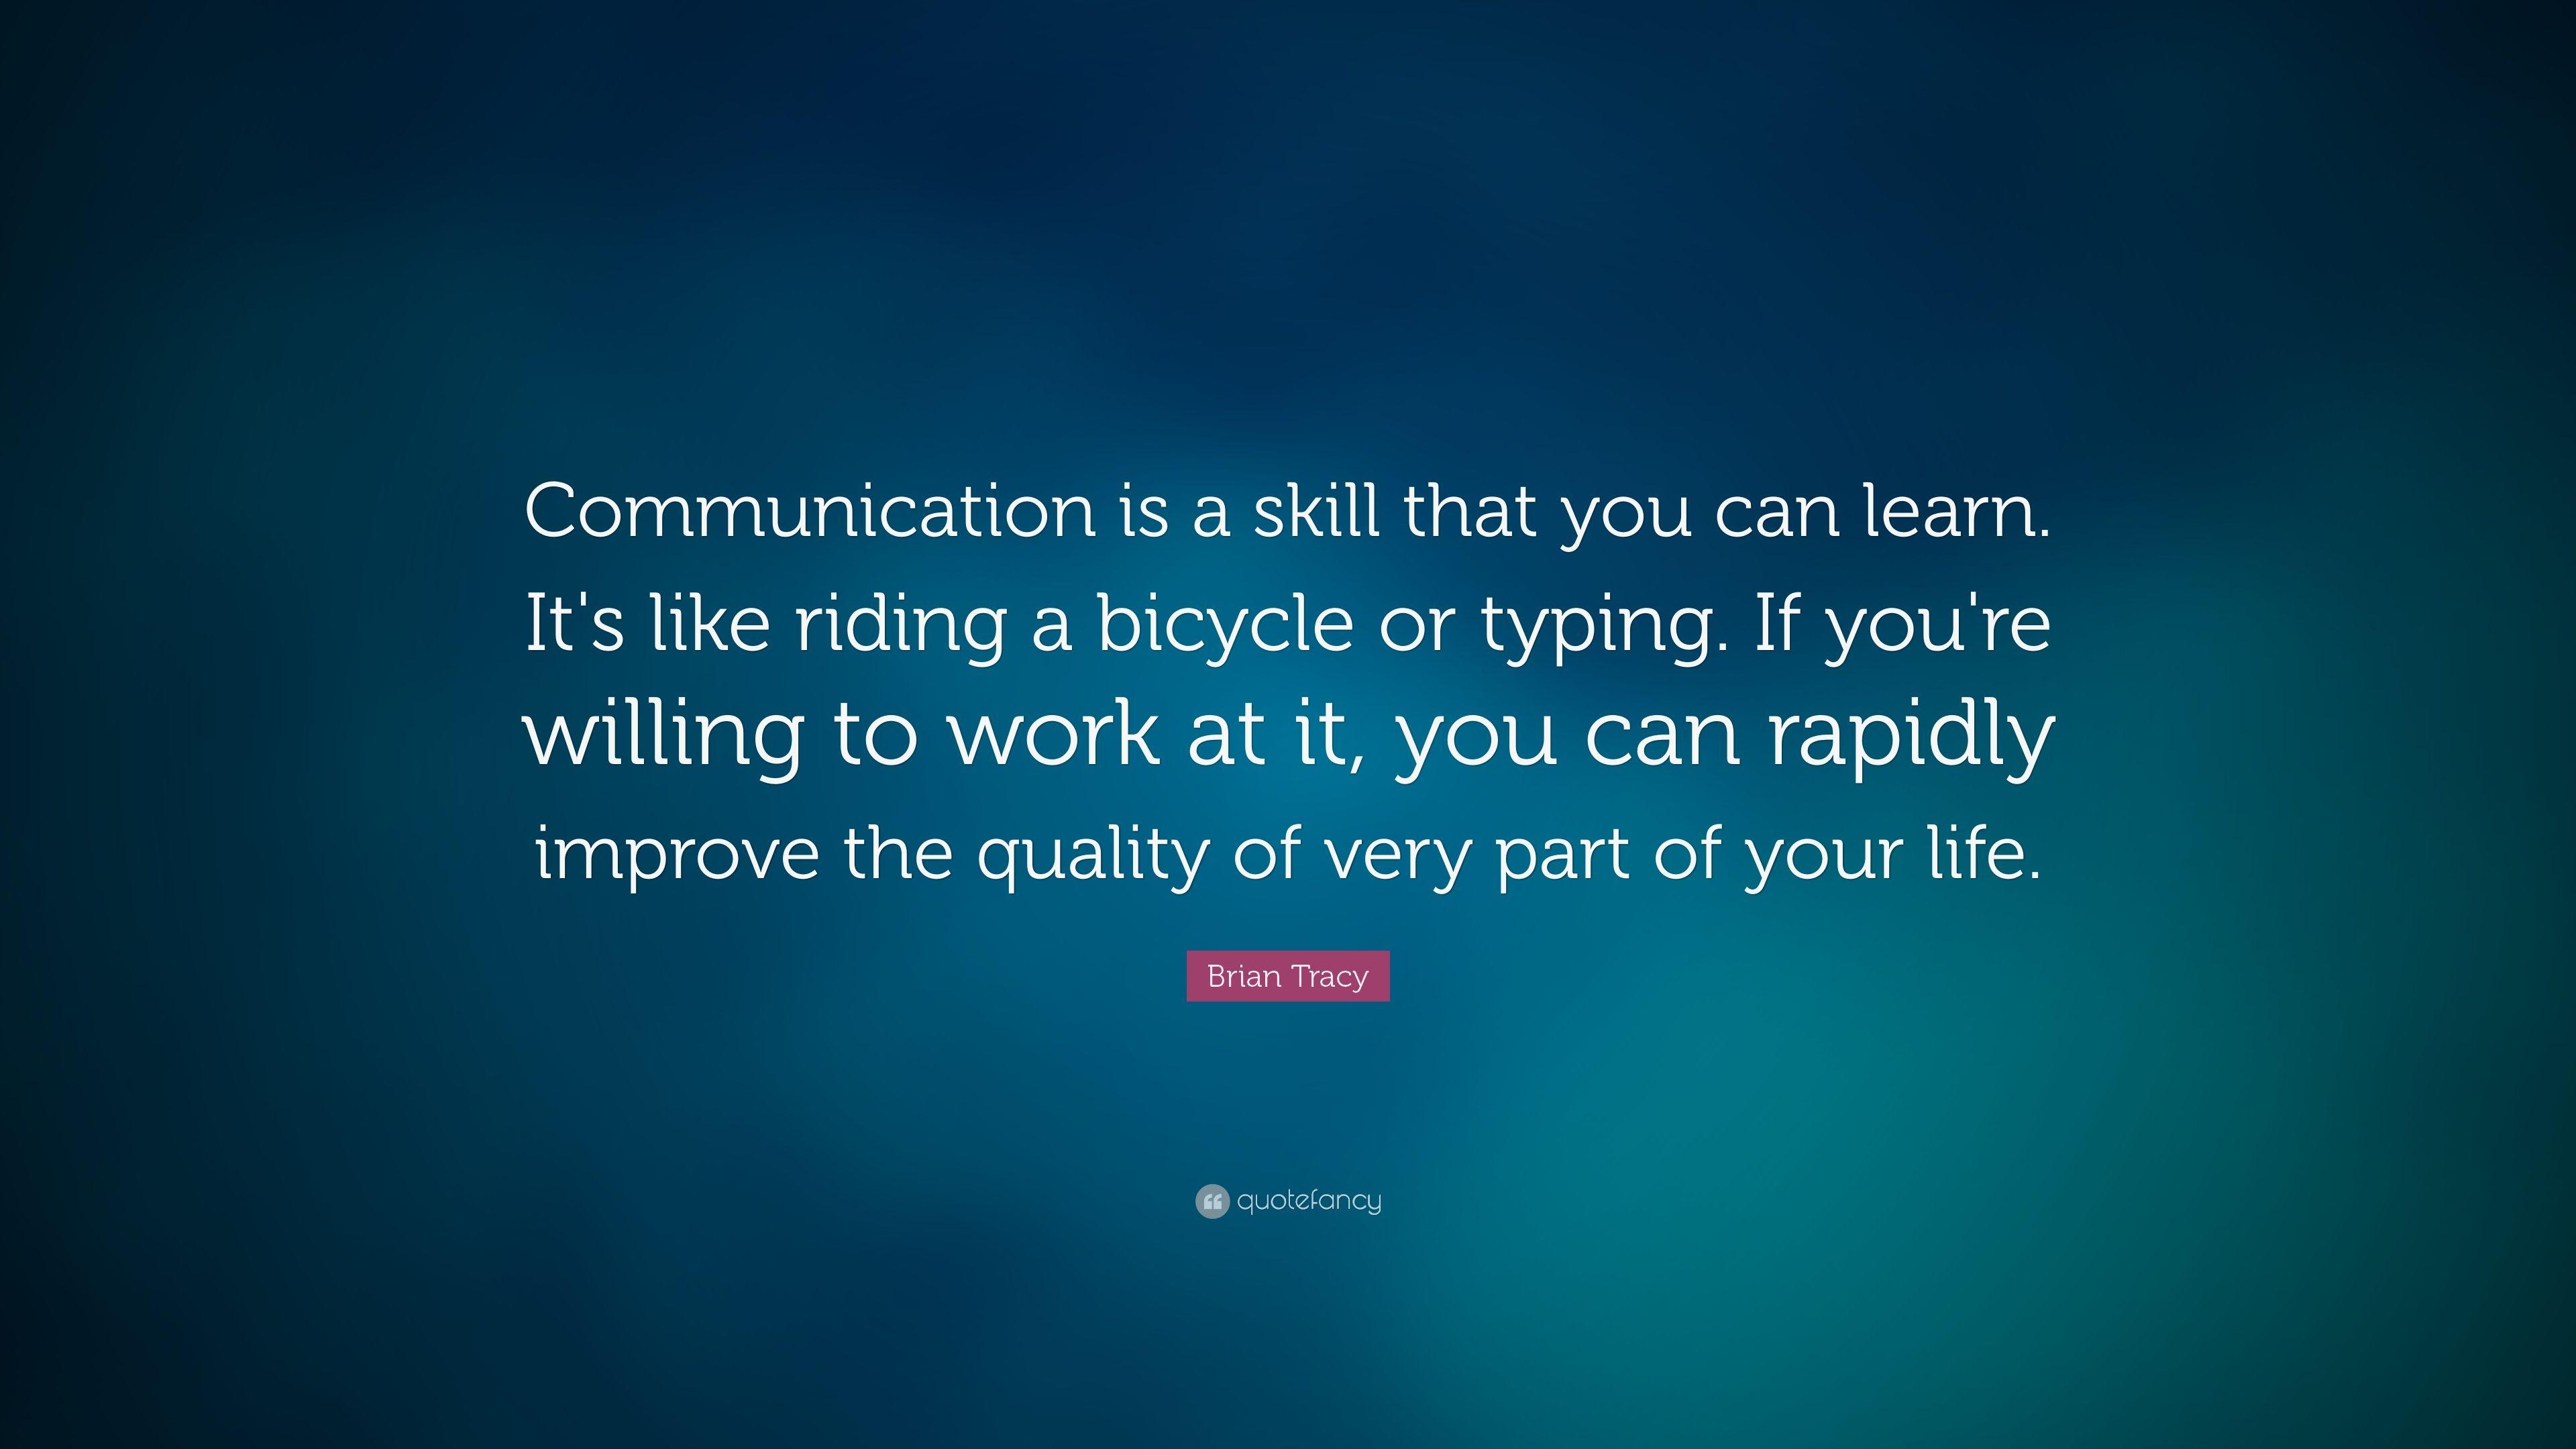 Brian Tracy Quote: “Communication is a skill that you can learn